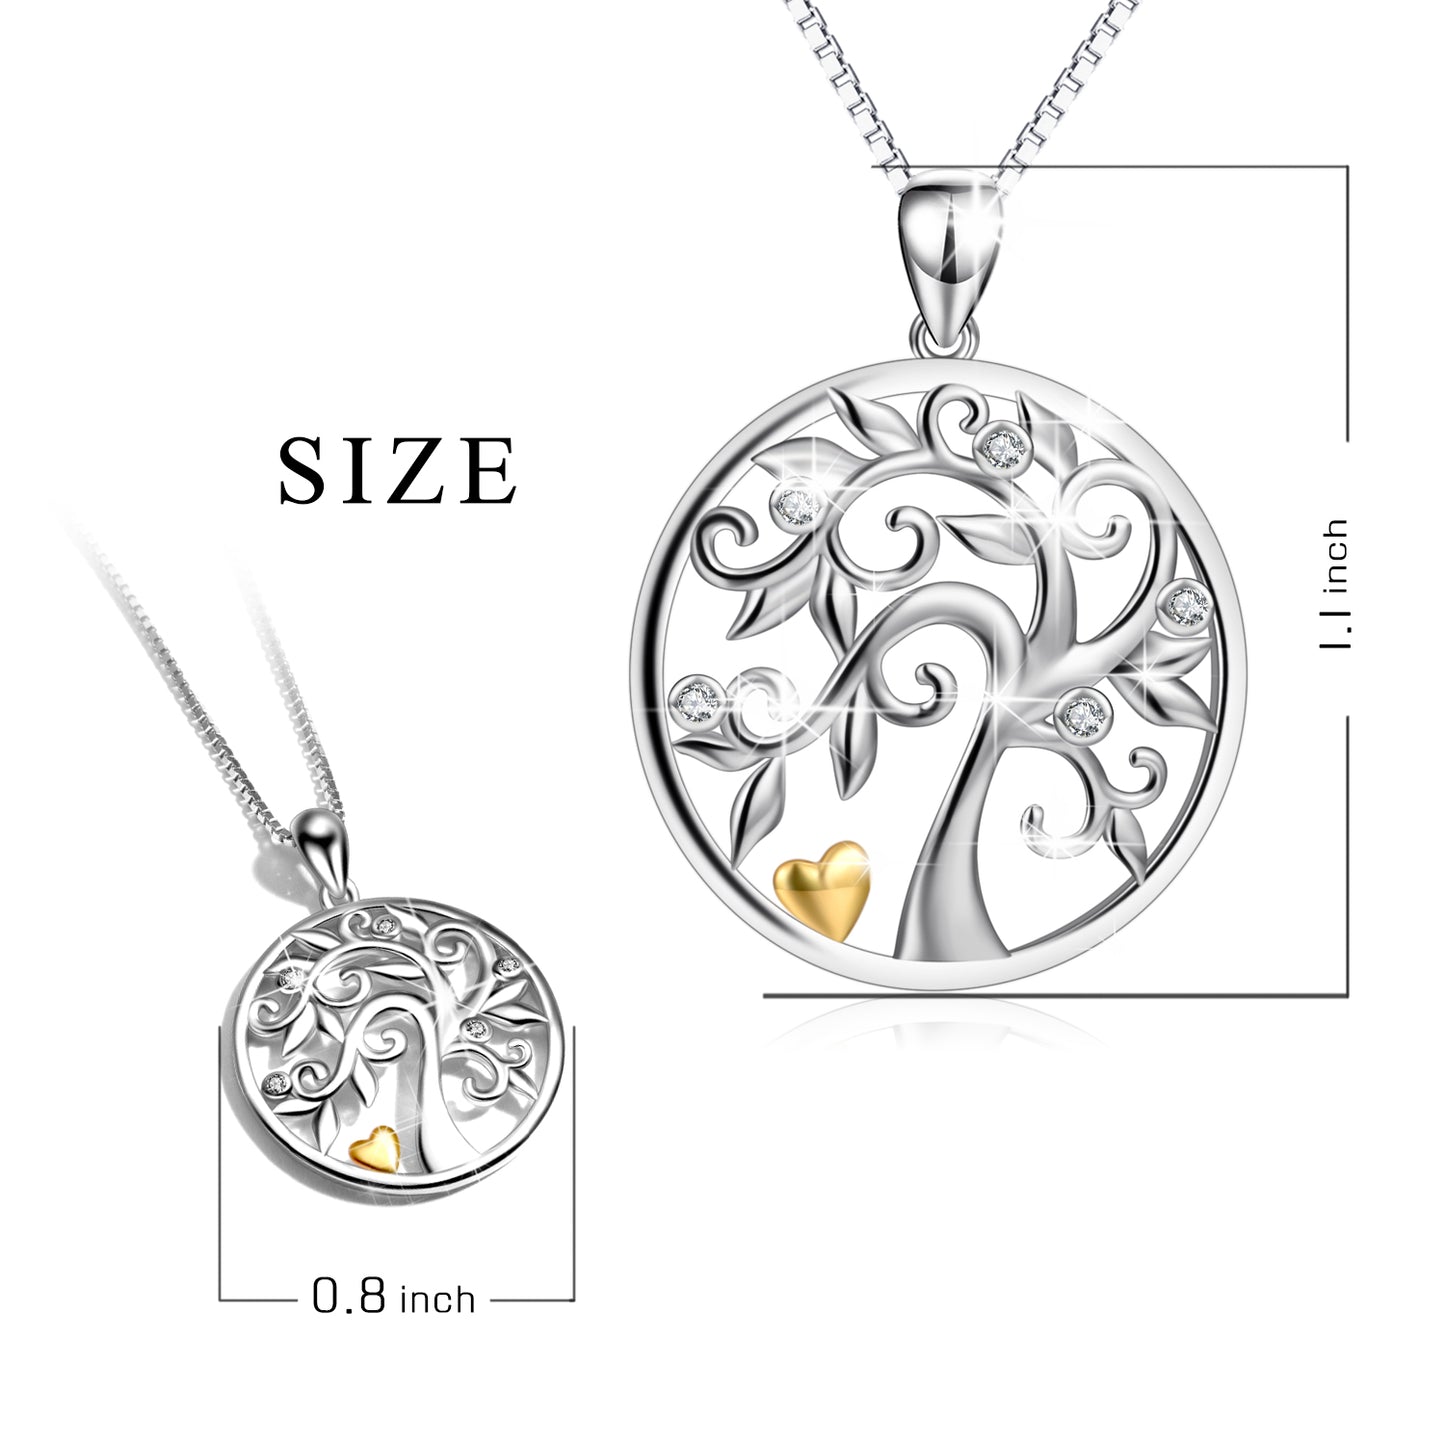 S925 Sterling Silver Tree of Life Necklace